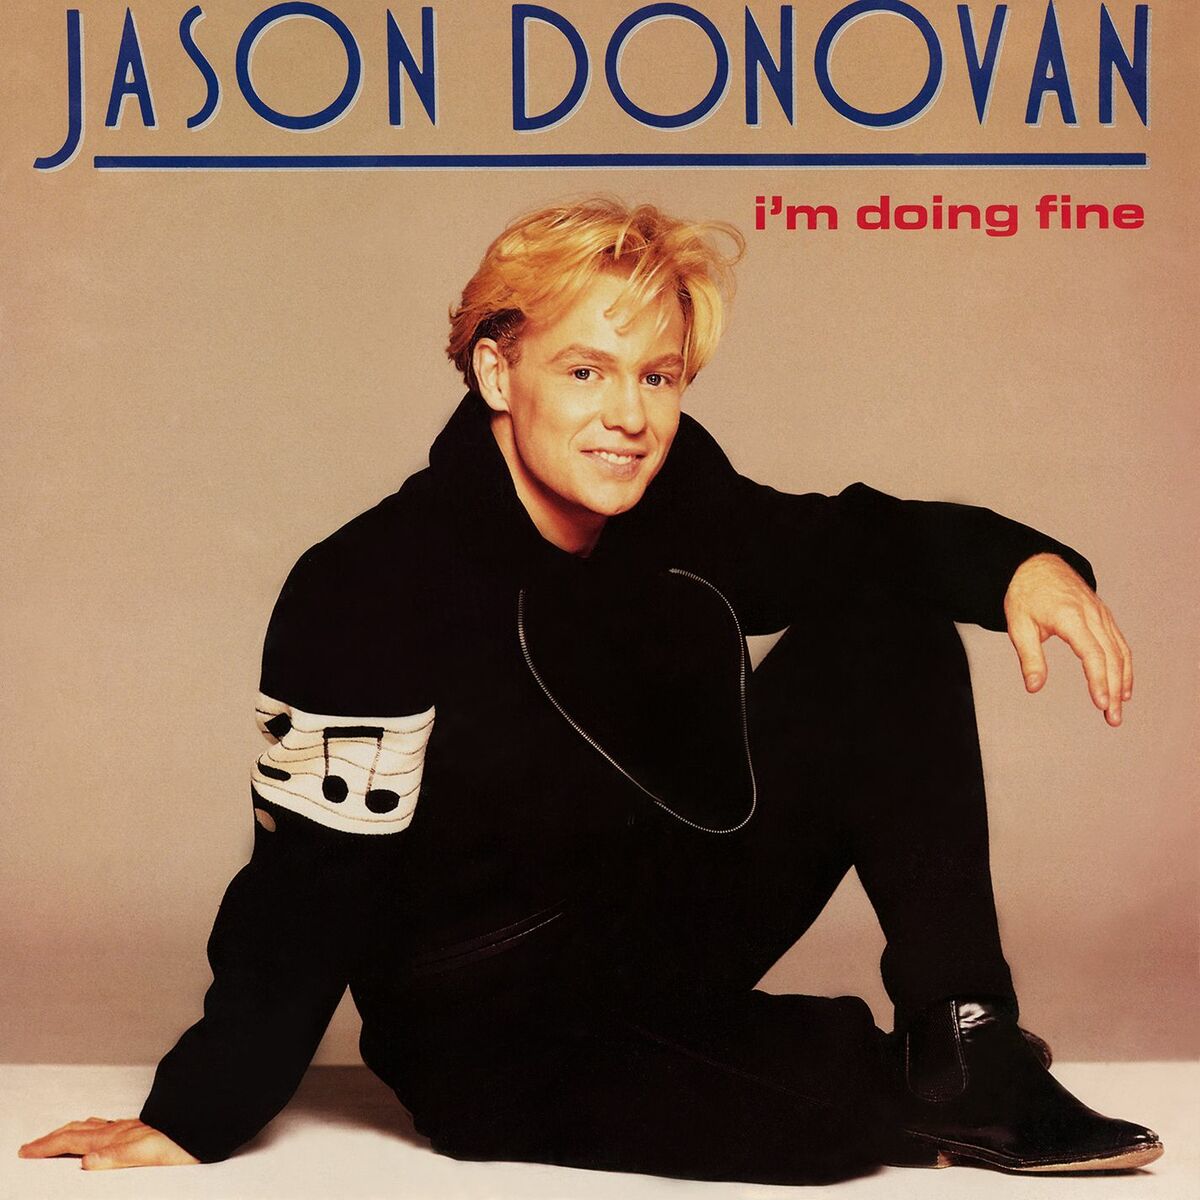 Jason Donovan - When You Come Back to Me: lyrics and songs | Deezer